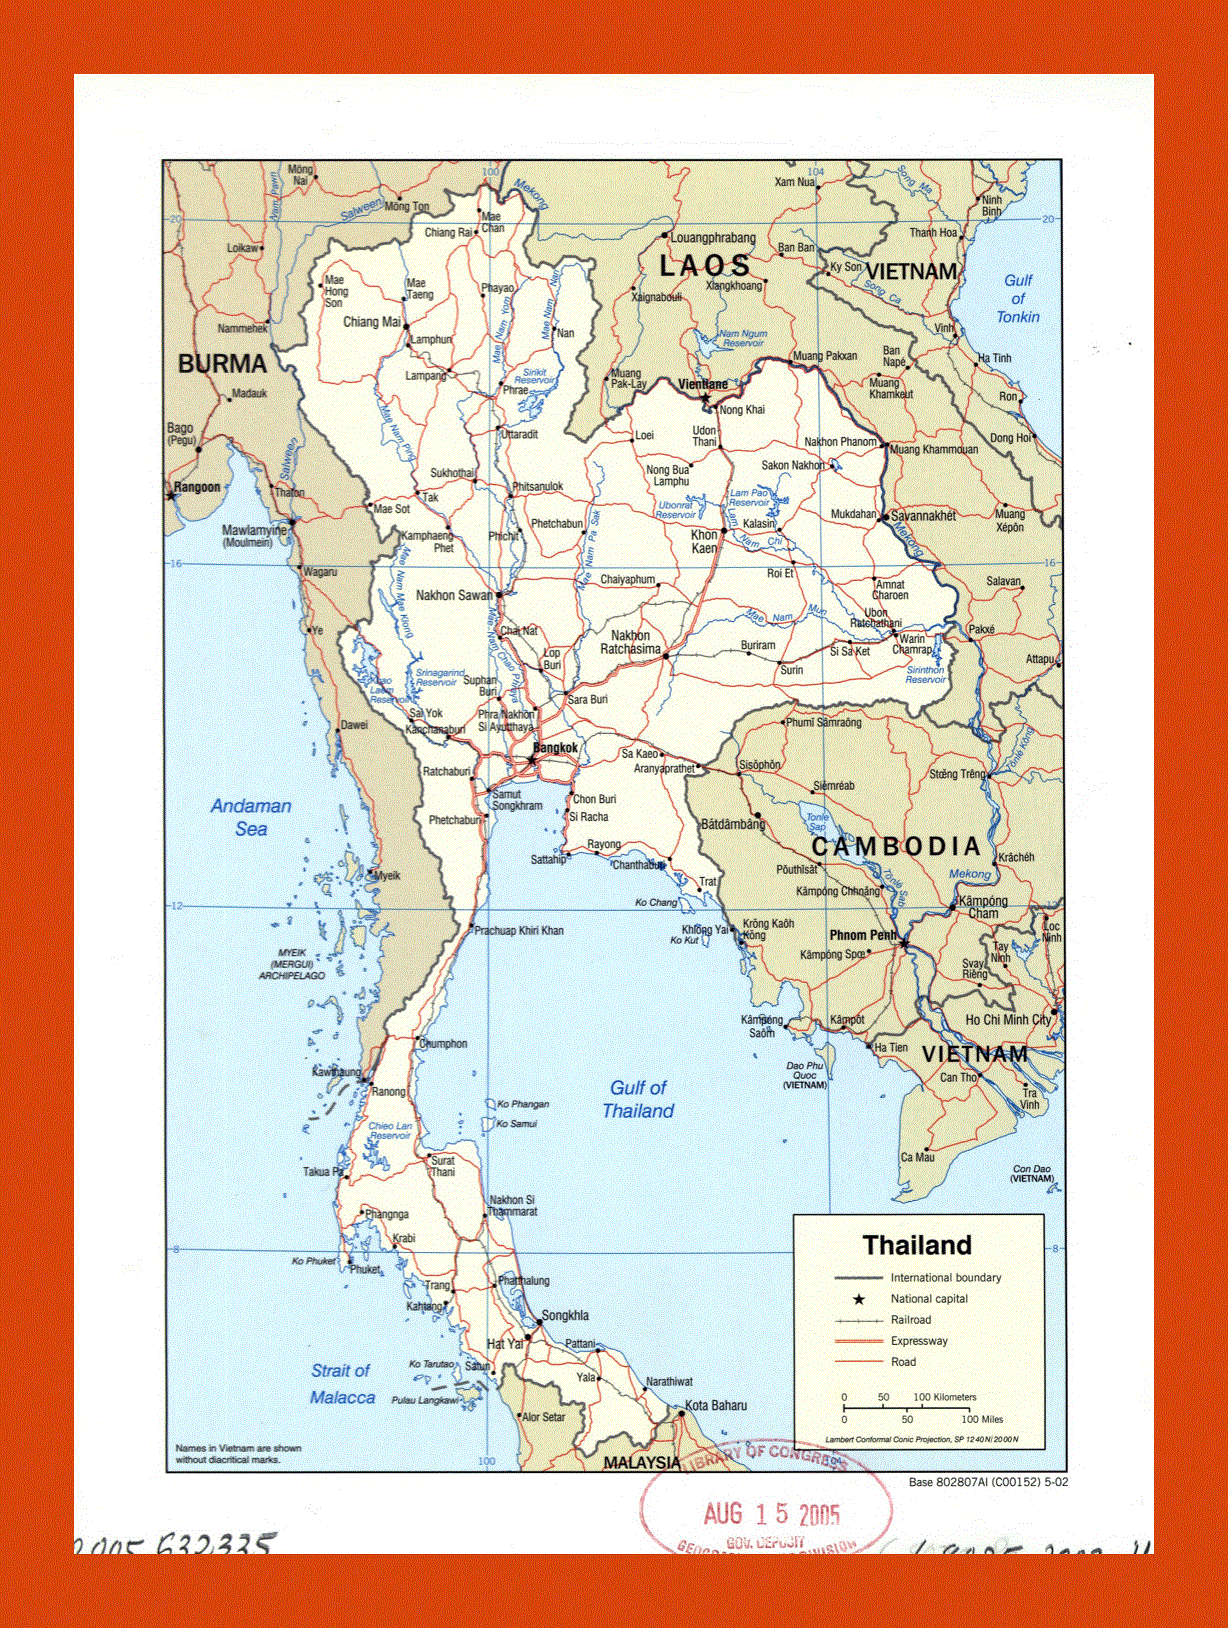 Political map of Thailand - 2002